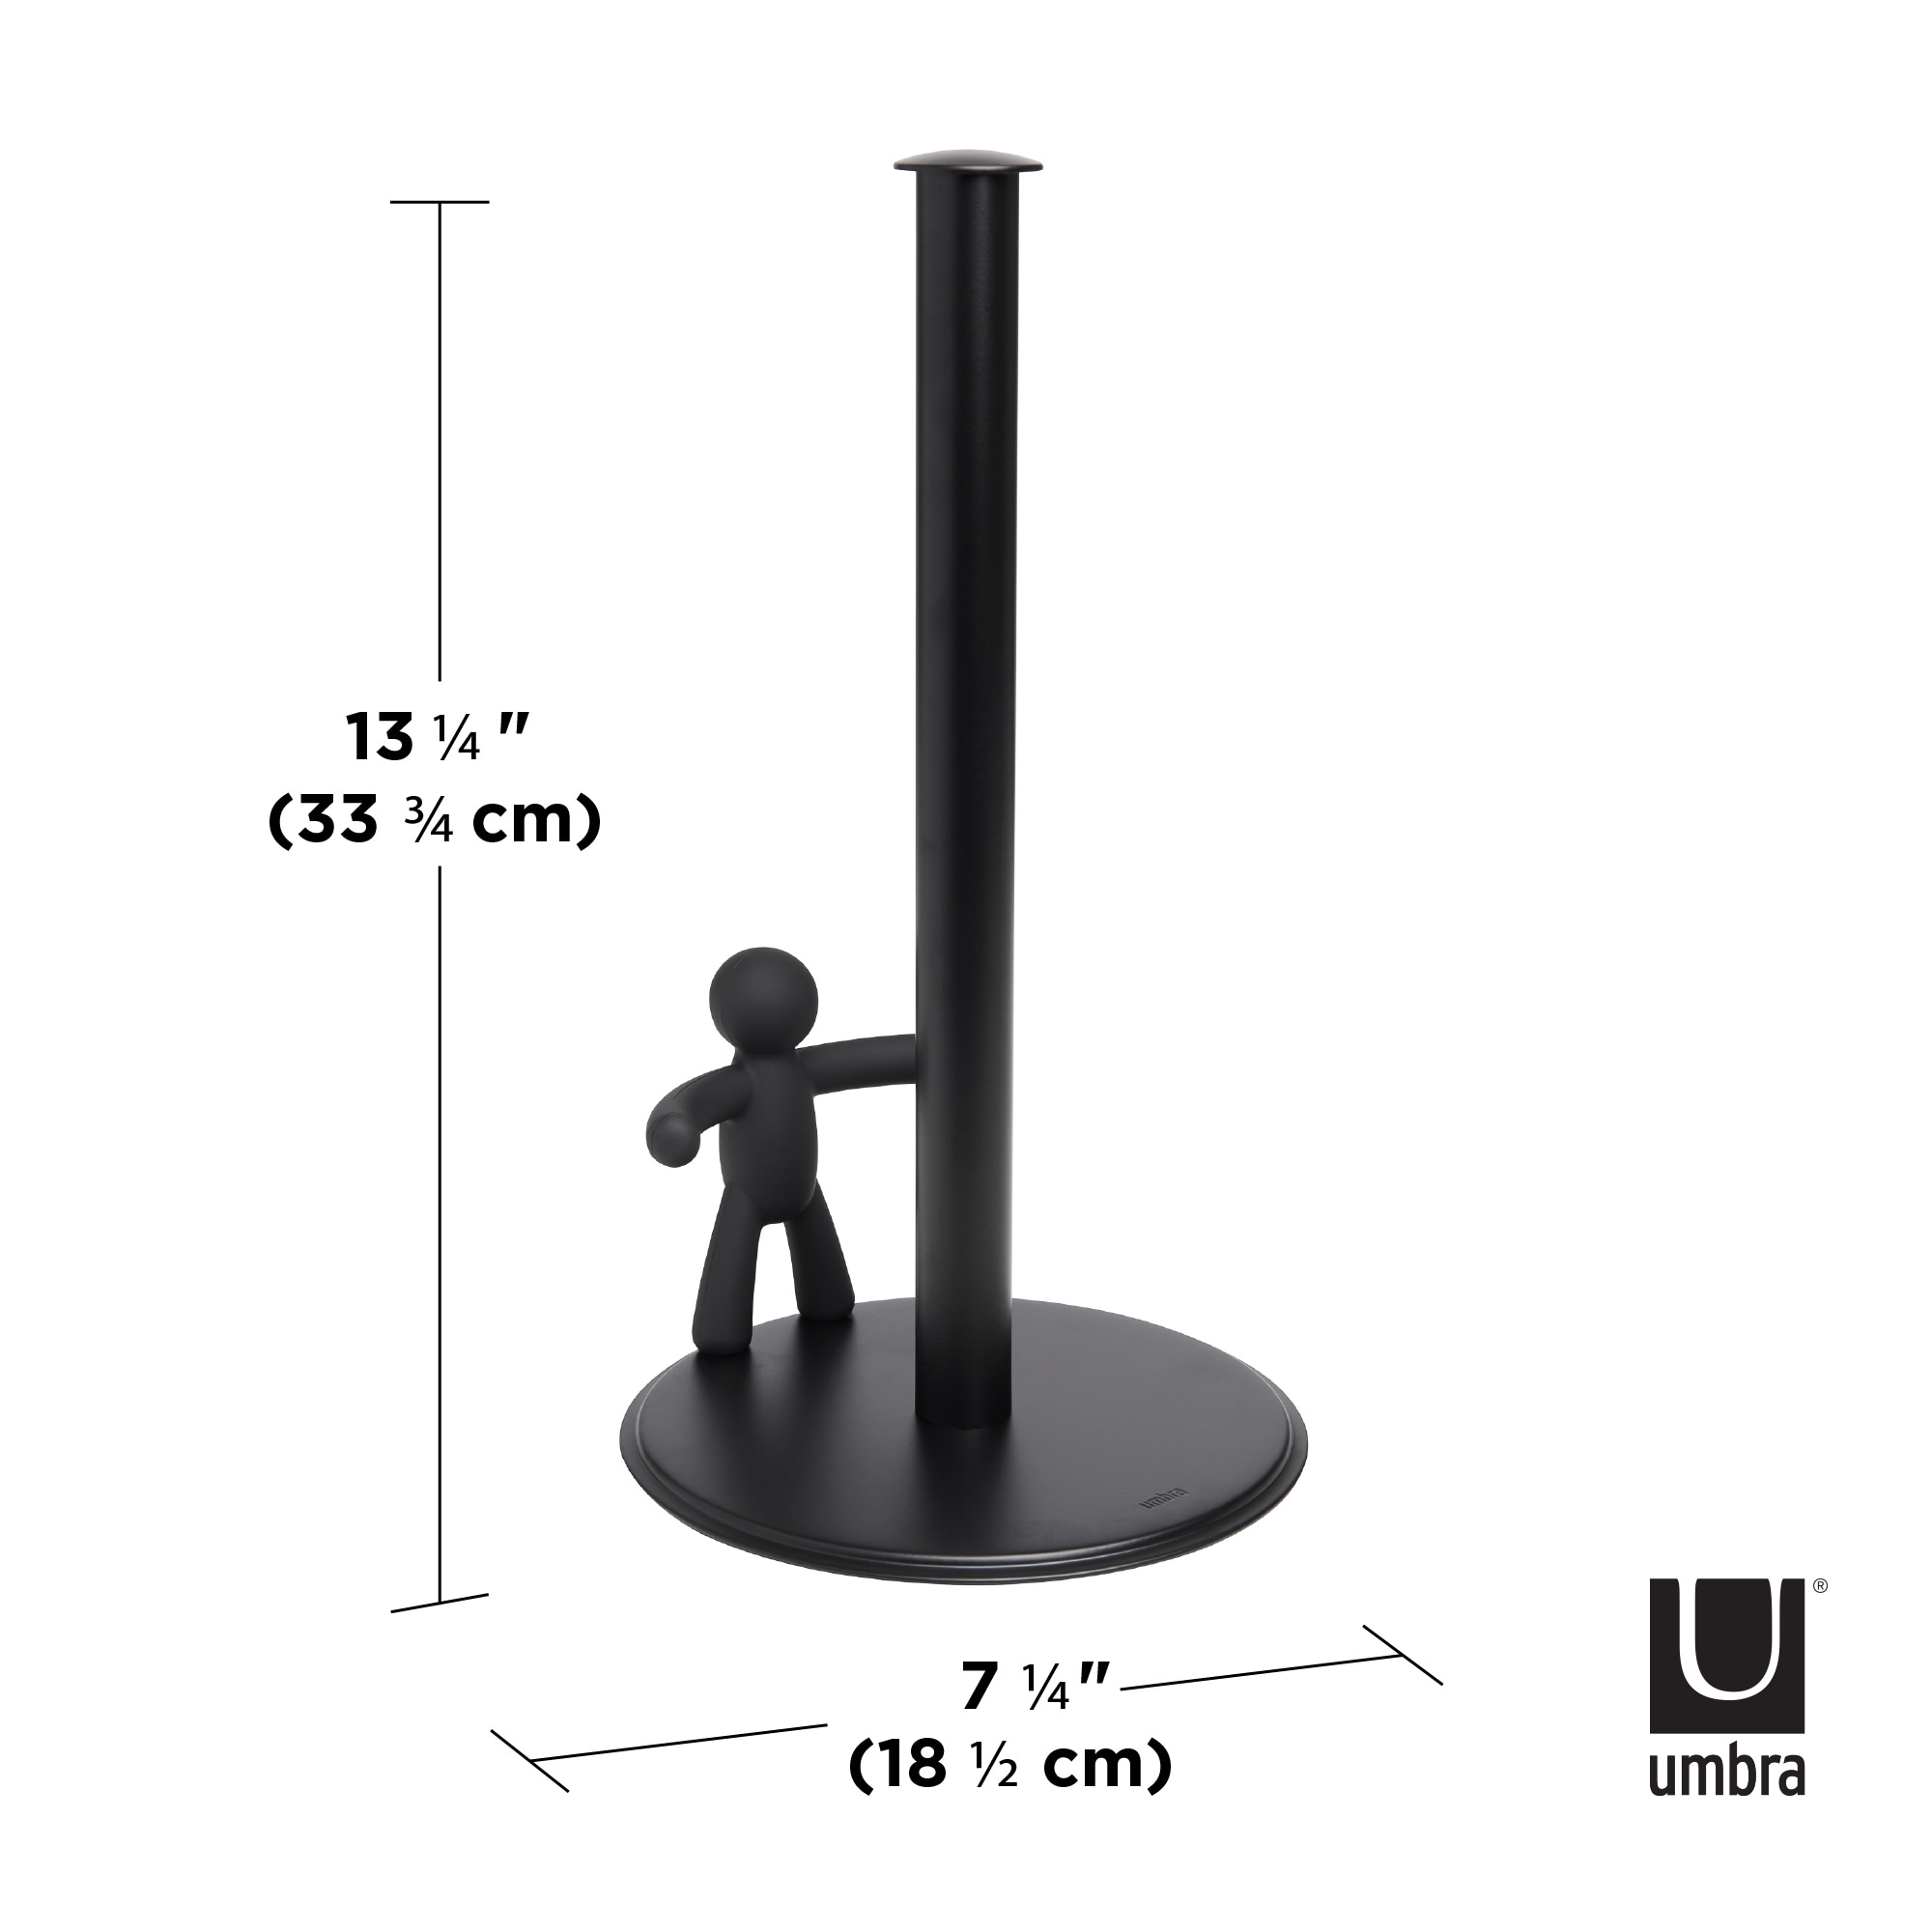 https://ak1.ostkcdn.com/images/products/is/images/direct/e00029541559be6984facf7af50194f4c5753757/Umbra-Buddy-Counter-Top-Paper-Towel-Holder.jpg